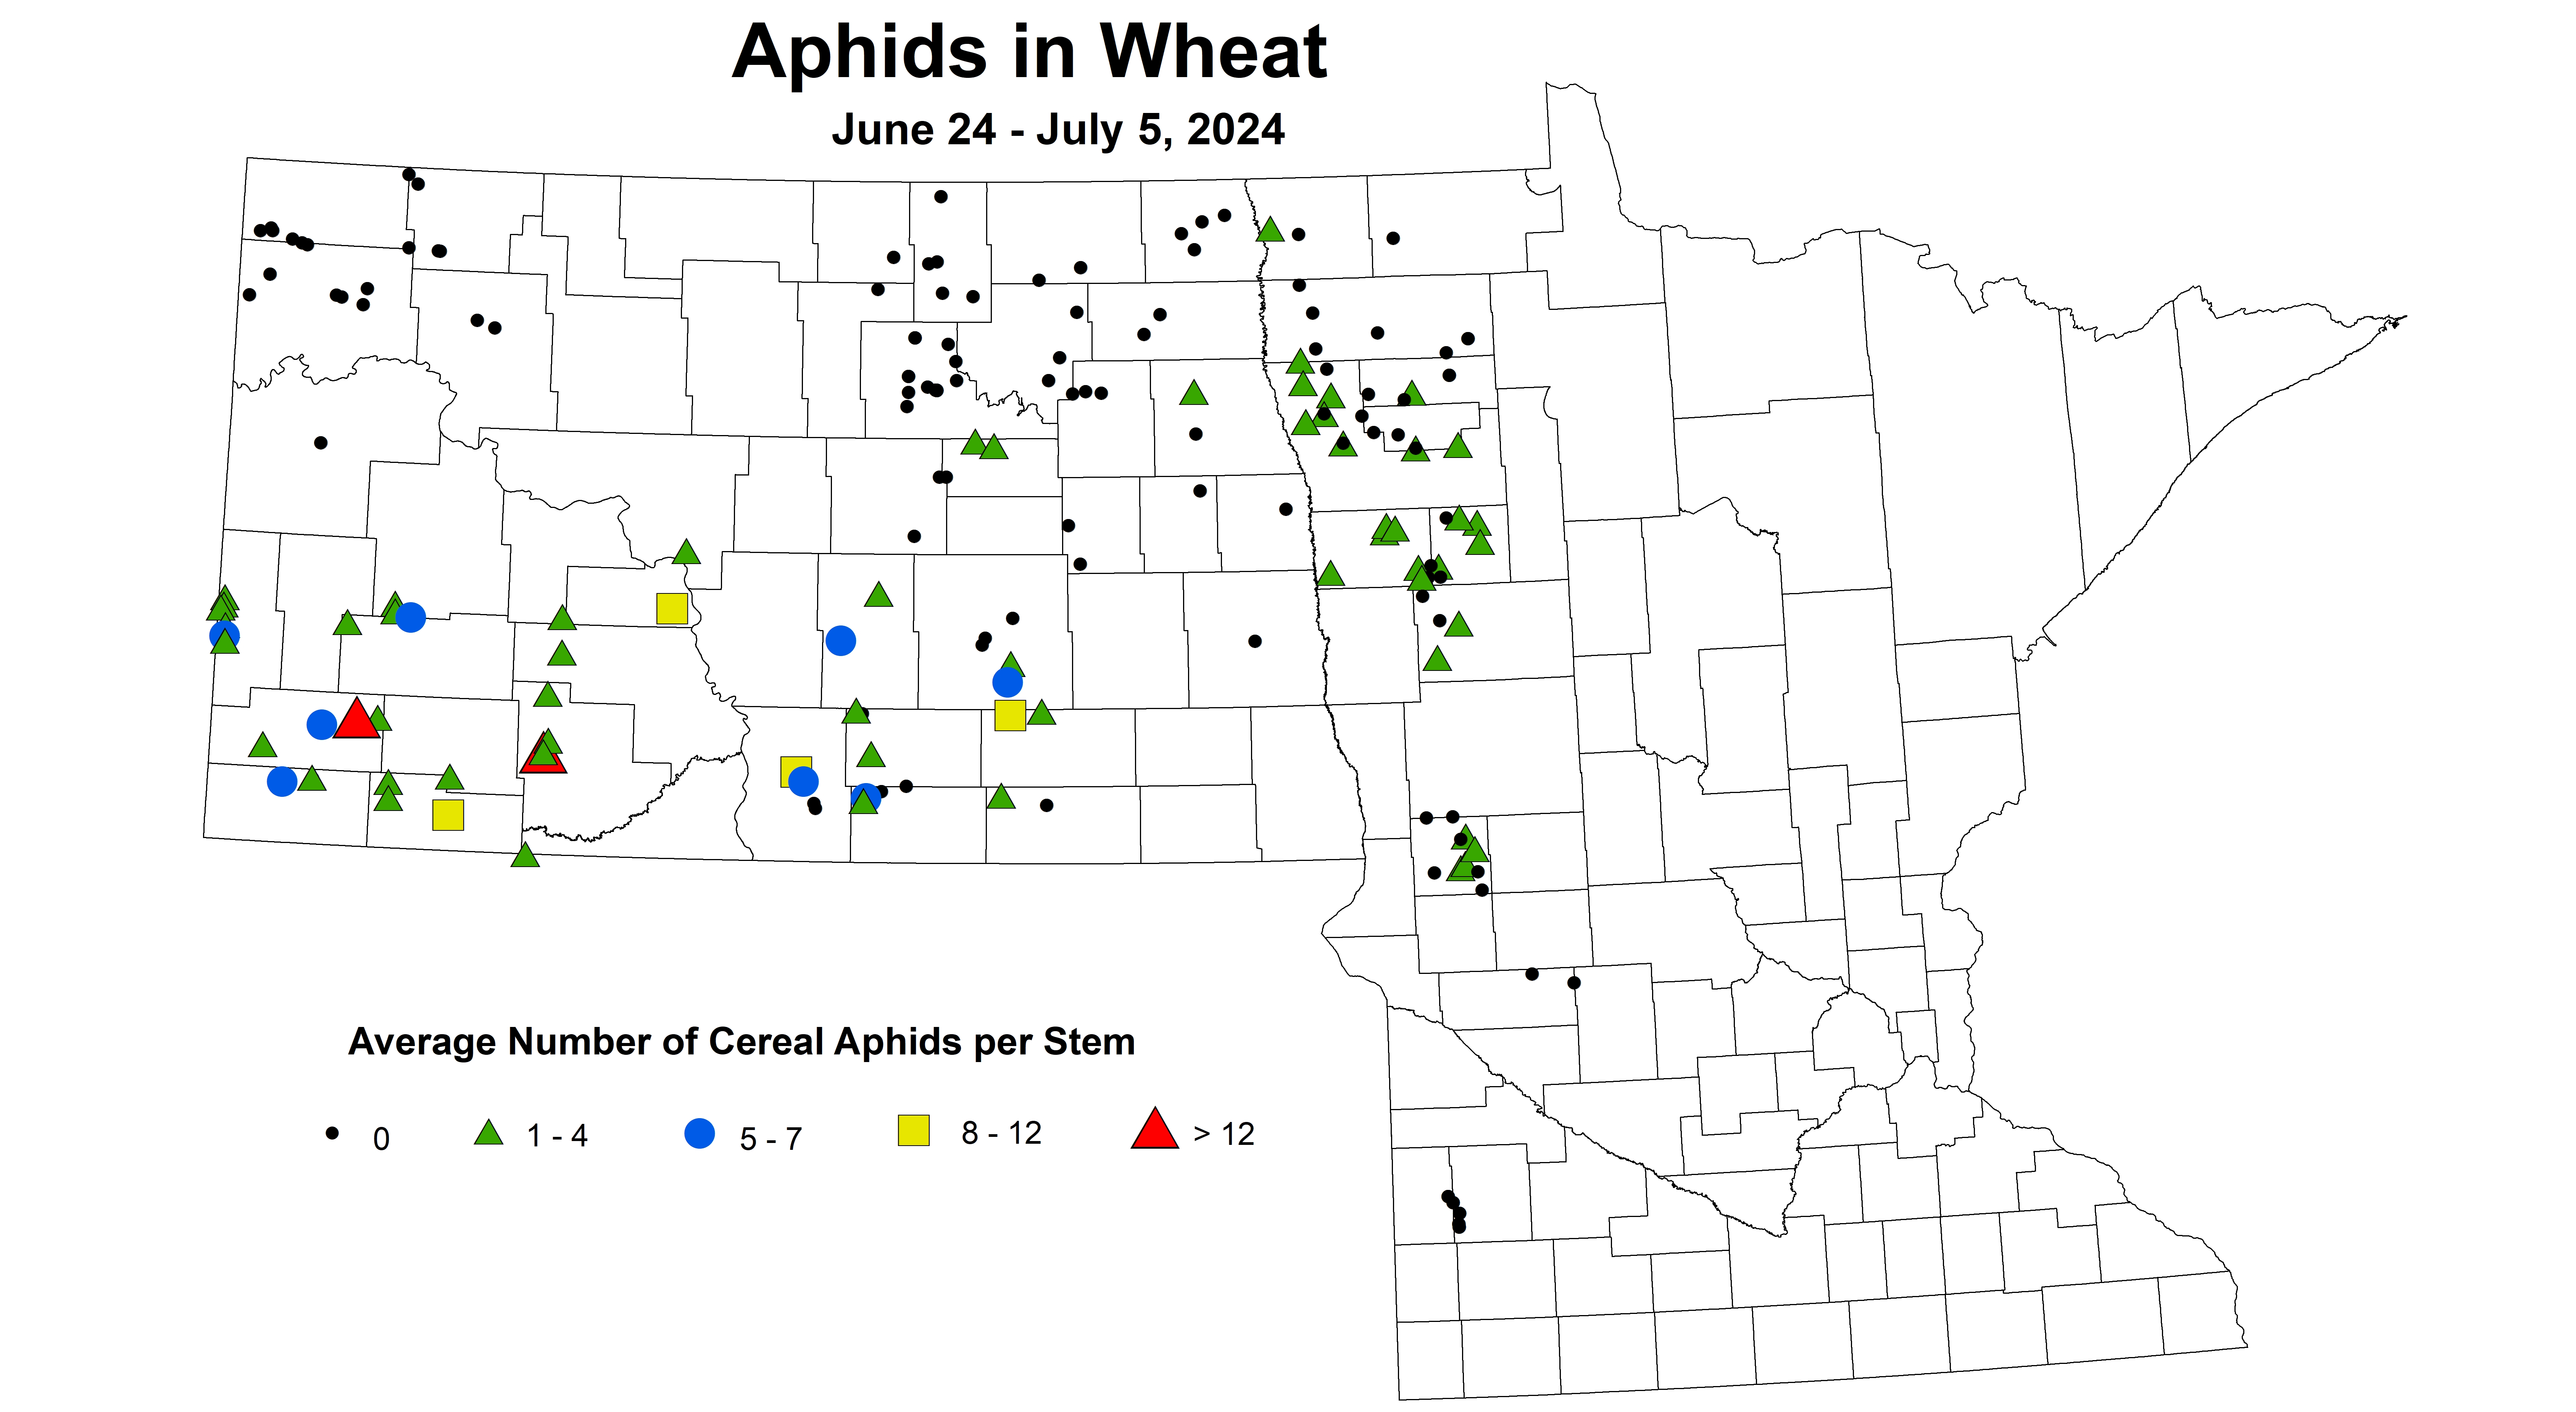 wheat aphids 2024 6.24-7.5